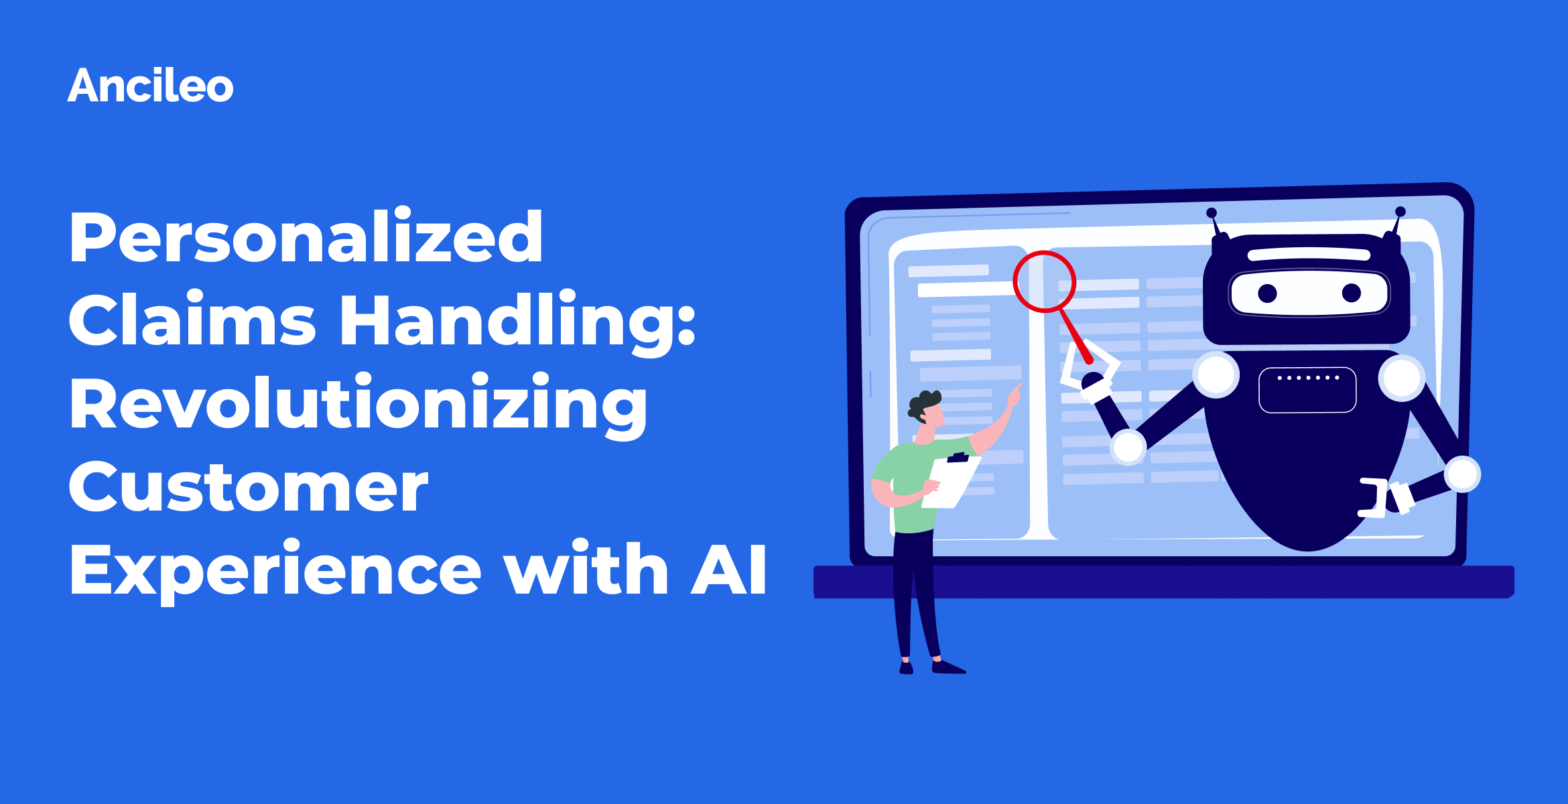 Personalized Claims Handling: Revolutionizing Customer Experience with AI